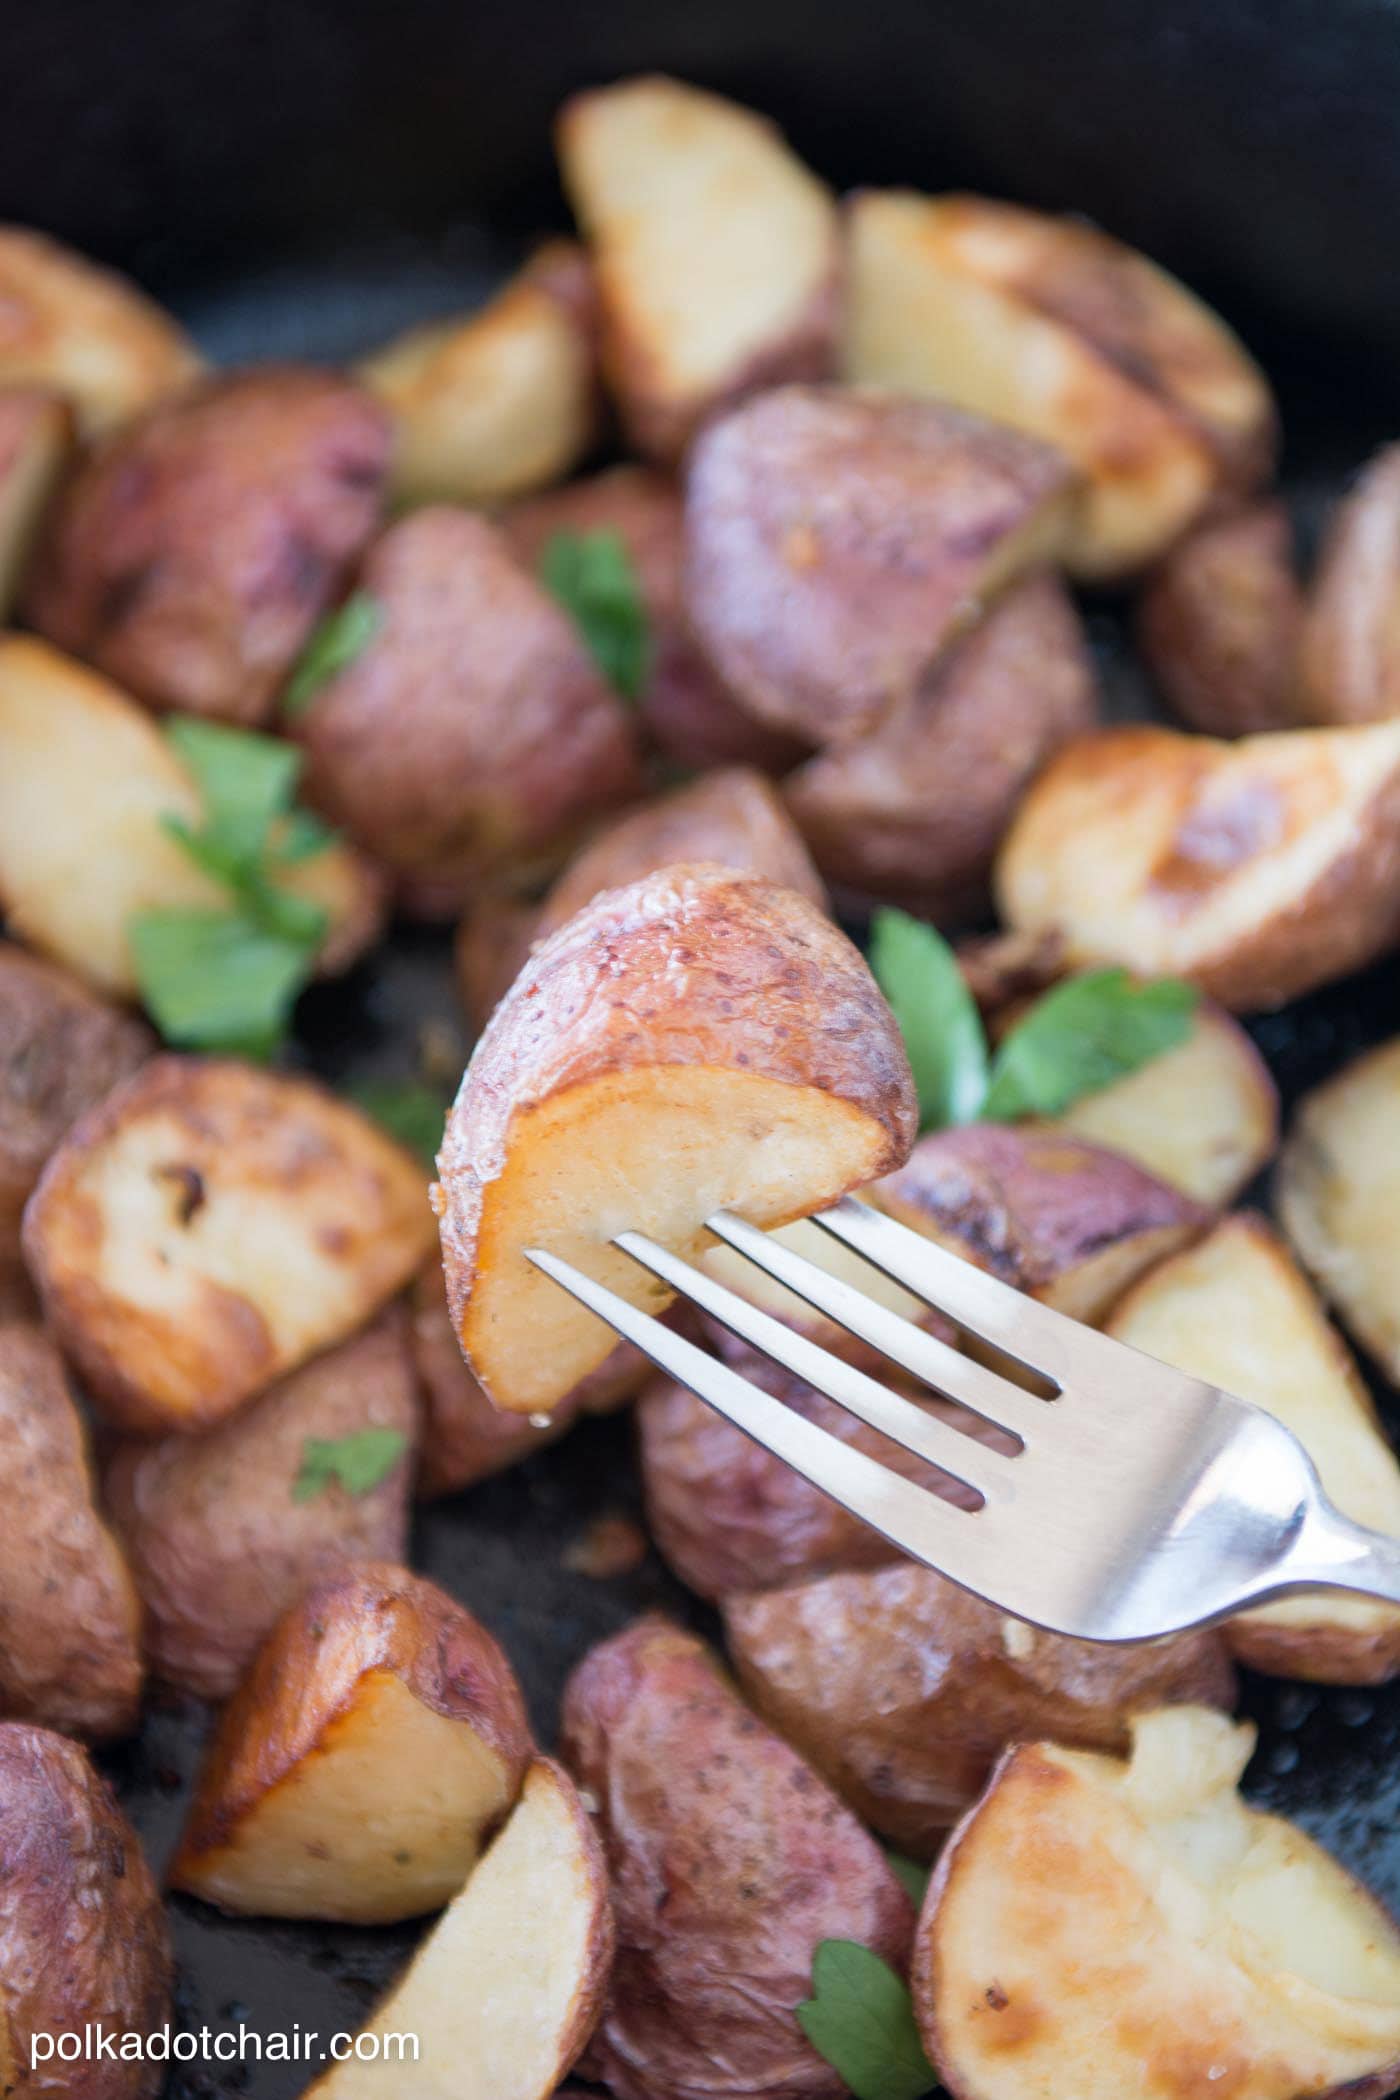 Cast Iron Skillet Roasted Potatoes Recipe - The Polka Dot Chair